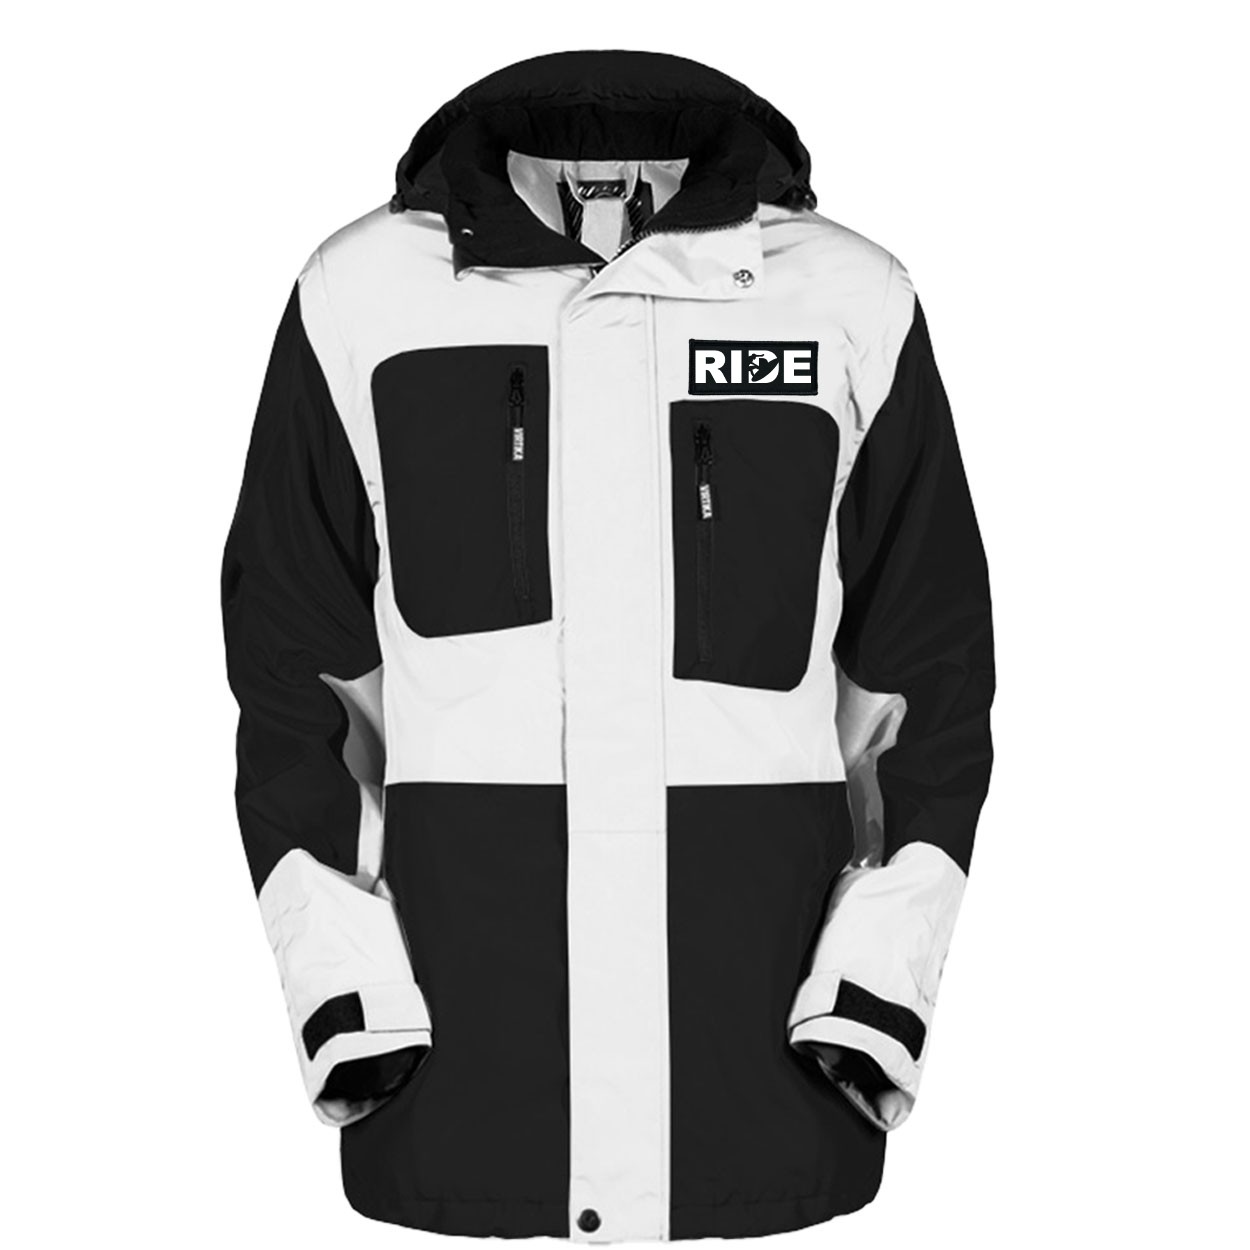 Ride Surf Logo Classic Woven Patch Pro Snowboard Jacket (Black/White)